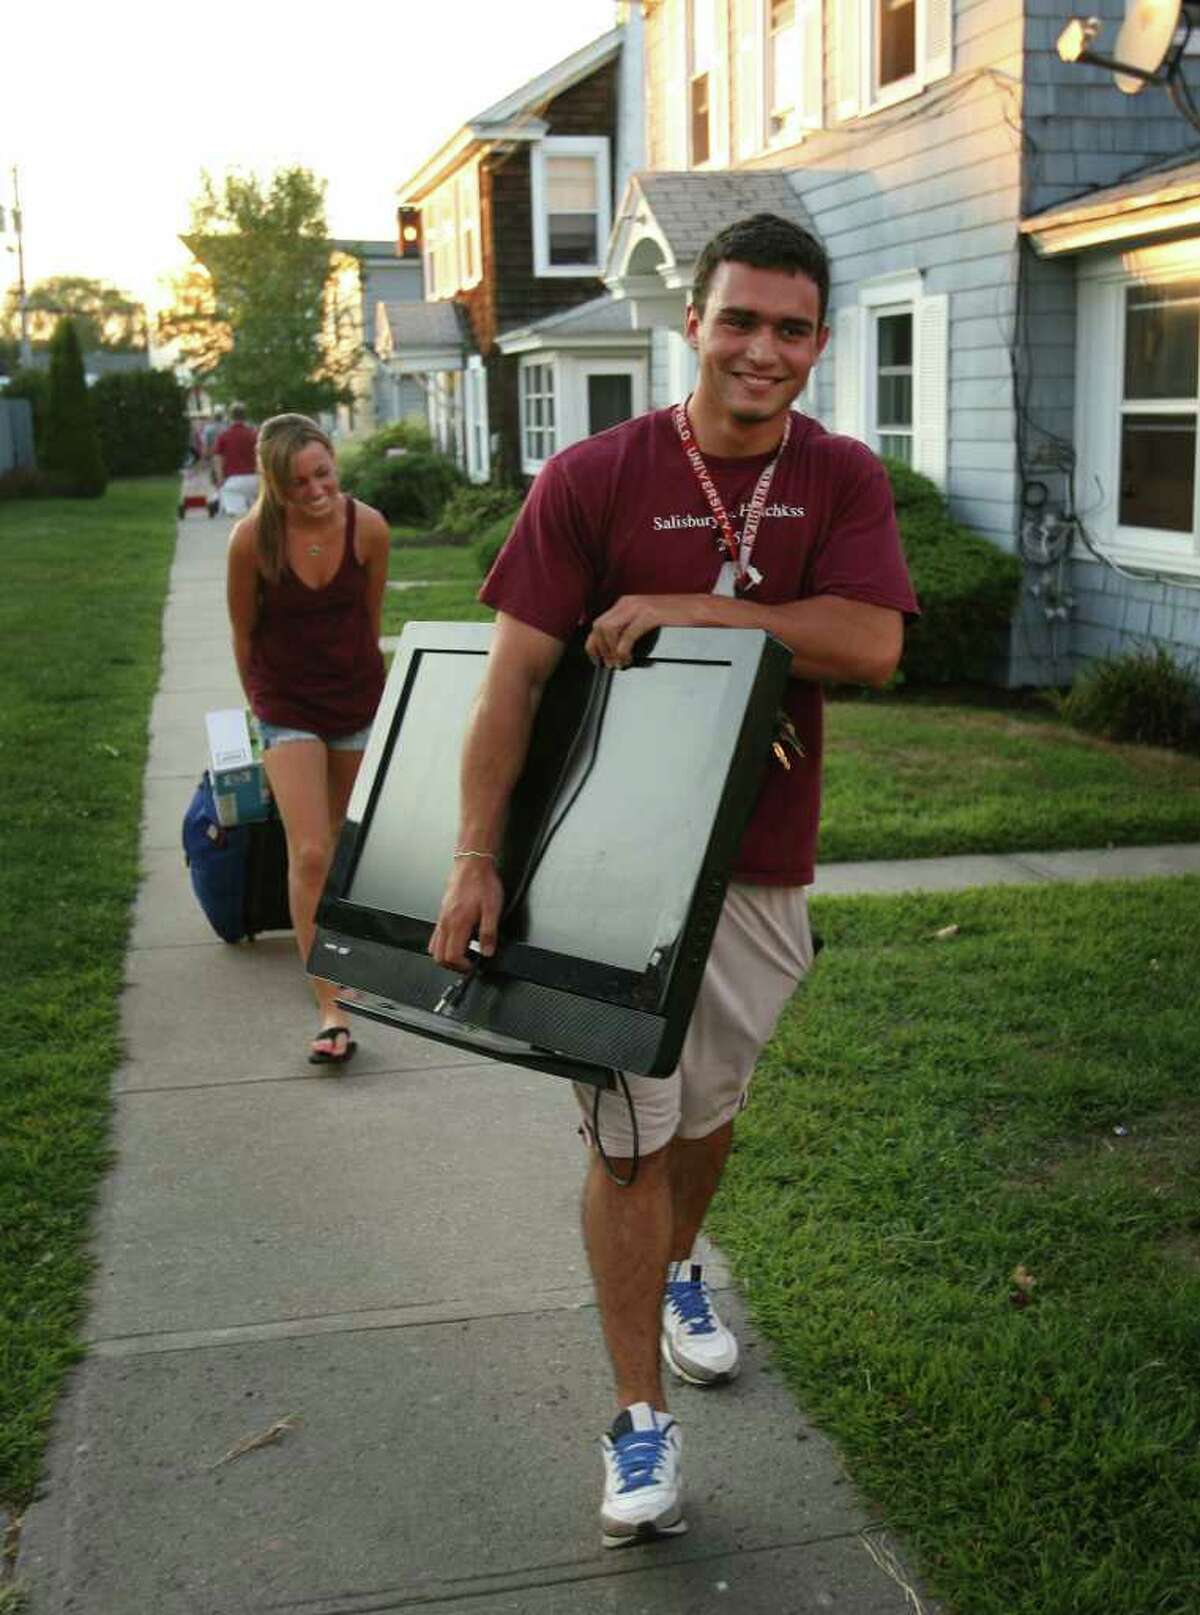 Fairfield University senior Mike Parent of Bethlehem, CT, carries his television to his rental house on Fairfield Beach on Monday, August 30, 2010.